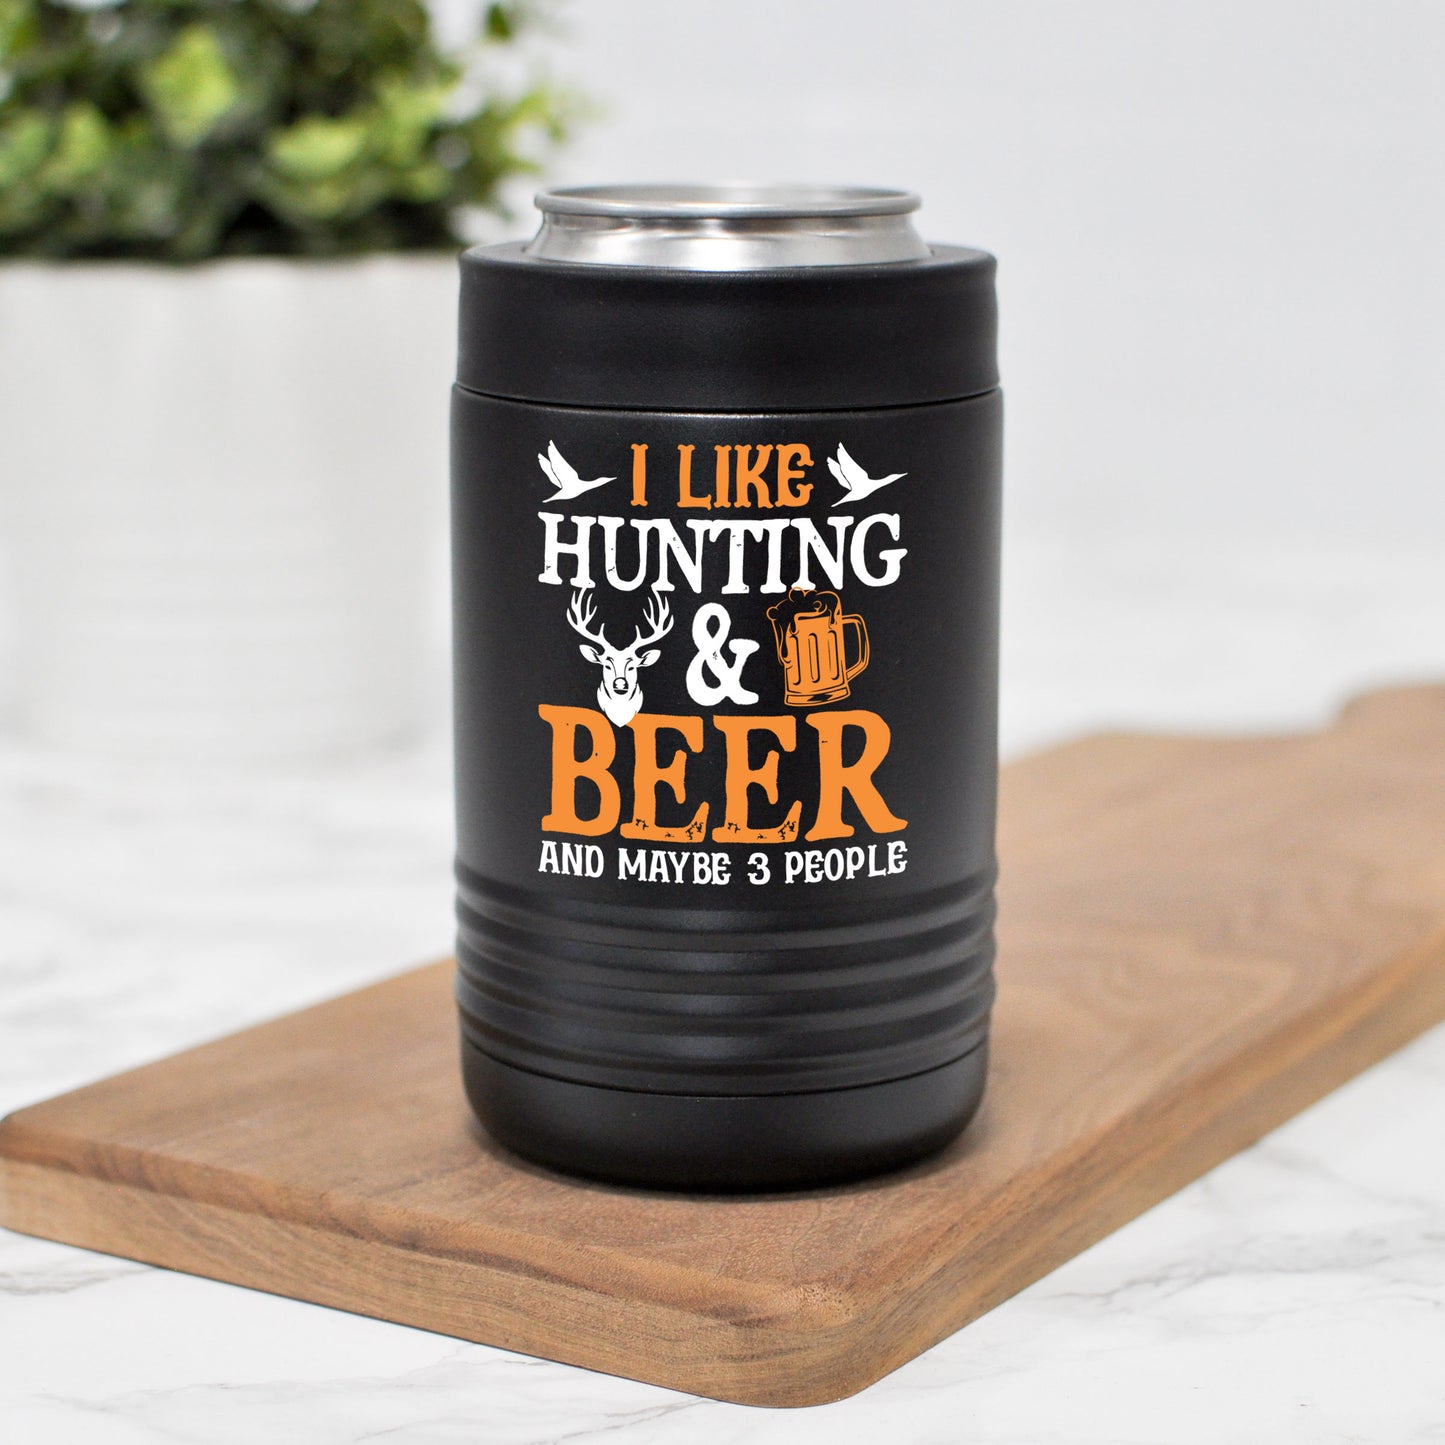 Funny Dad Can Holder | Father's Day Gift